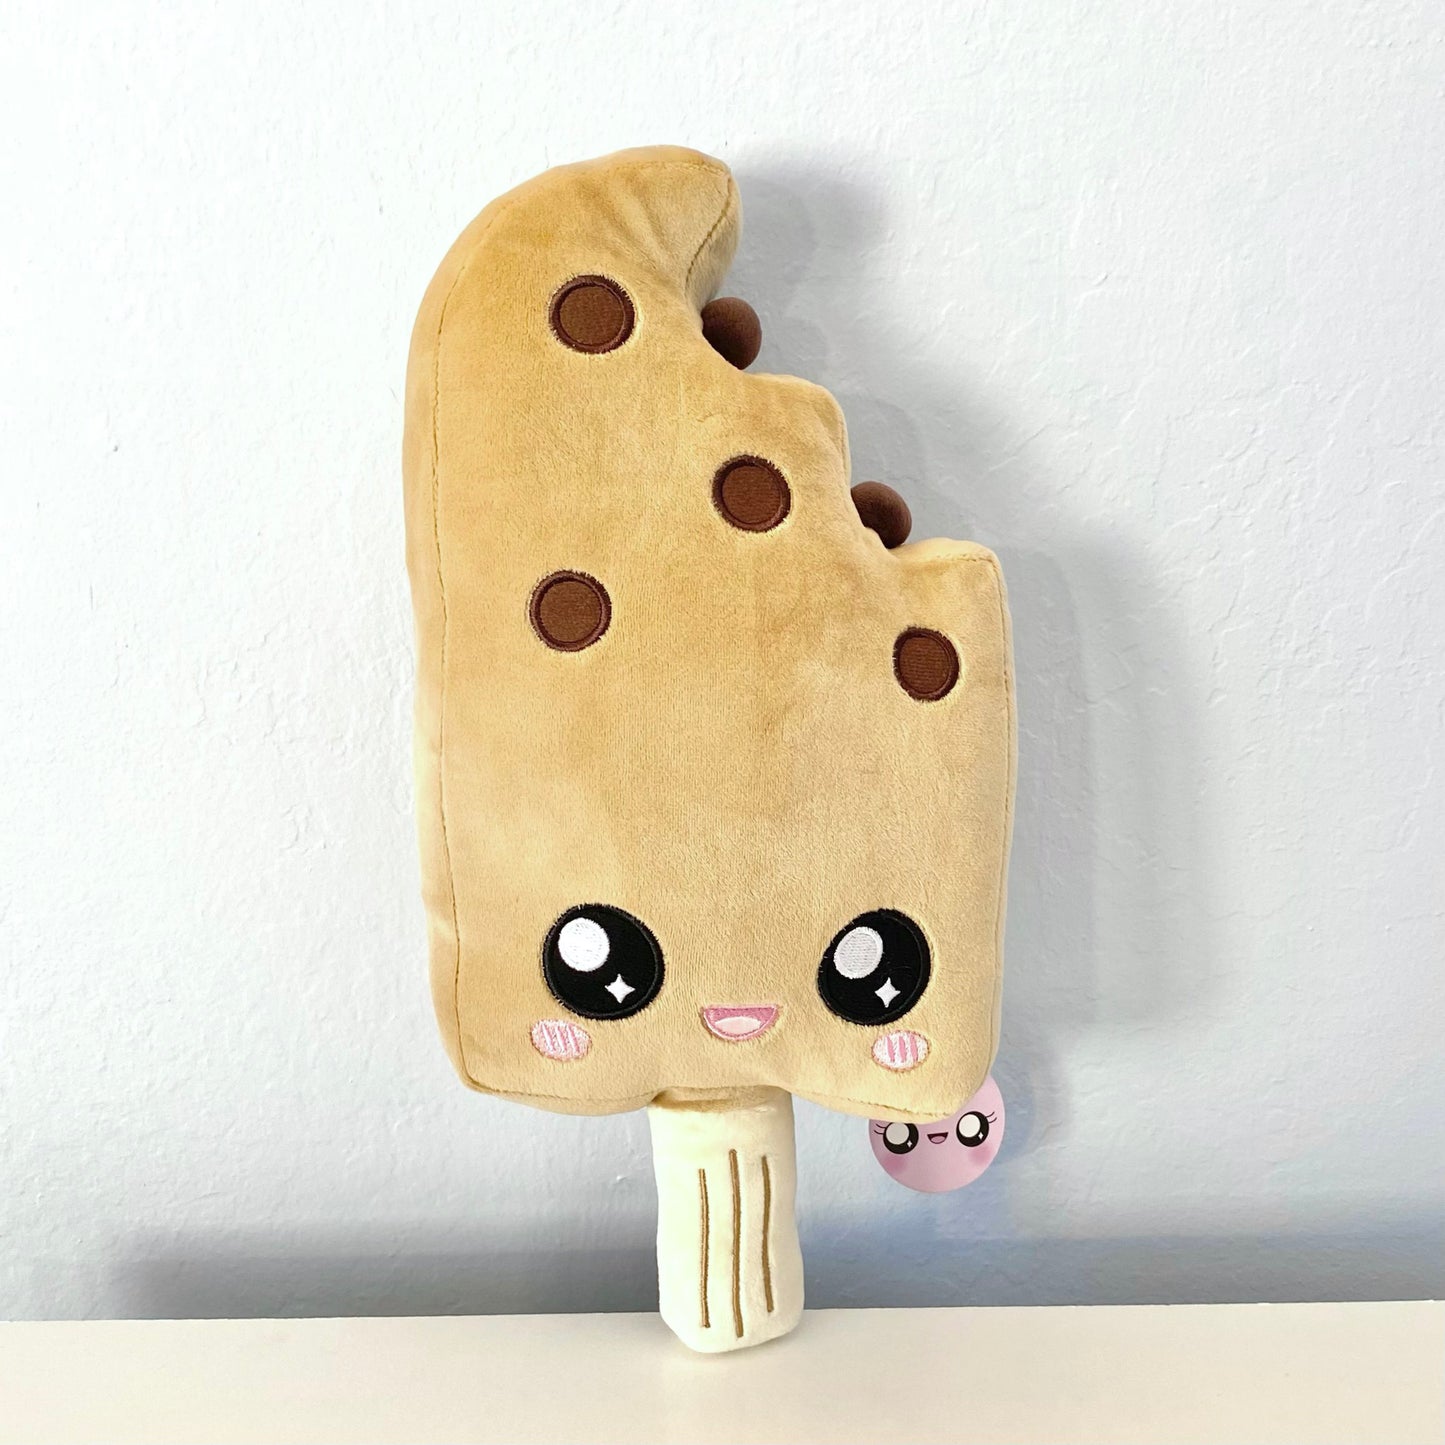 Plush toy of a boba ice cream bar with a cute open-mouth smiling face. The plush toy is shaped like an ice cream bar with a bite taken out of the top right corner.